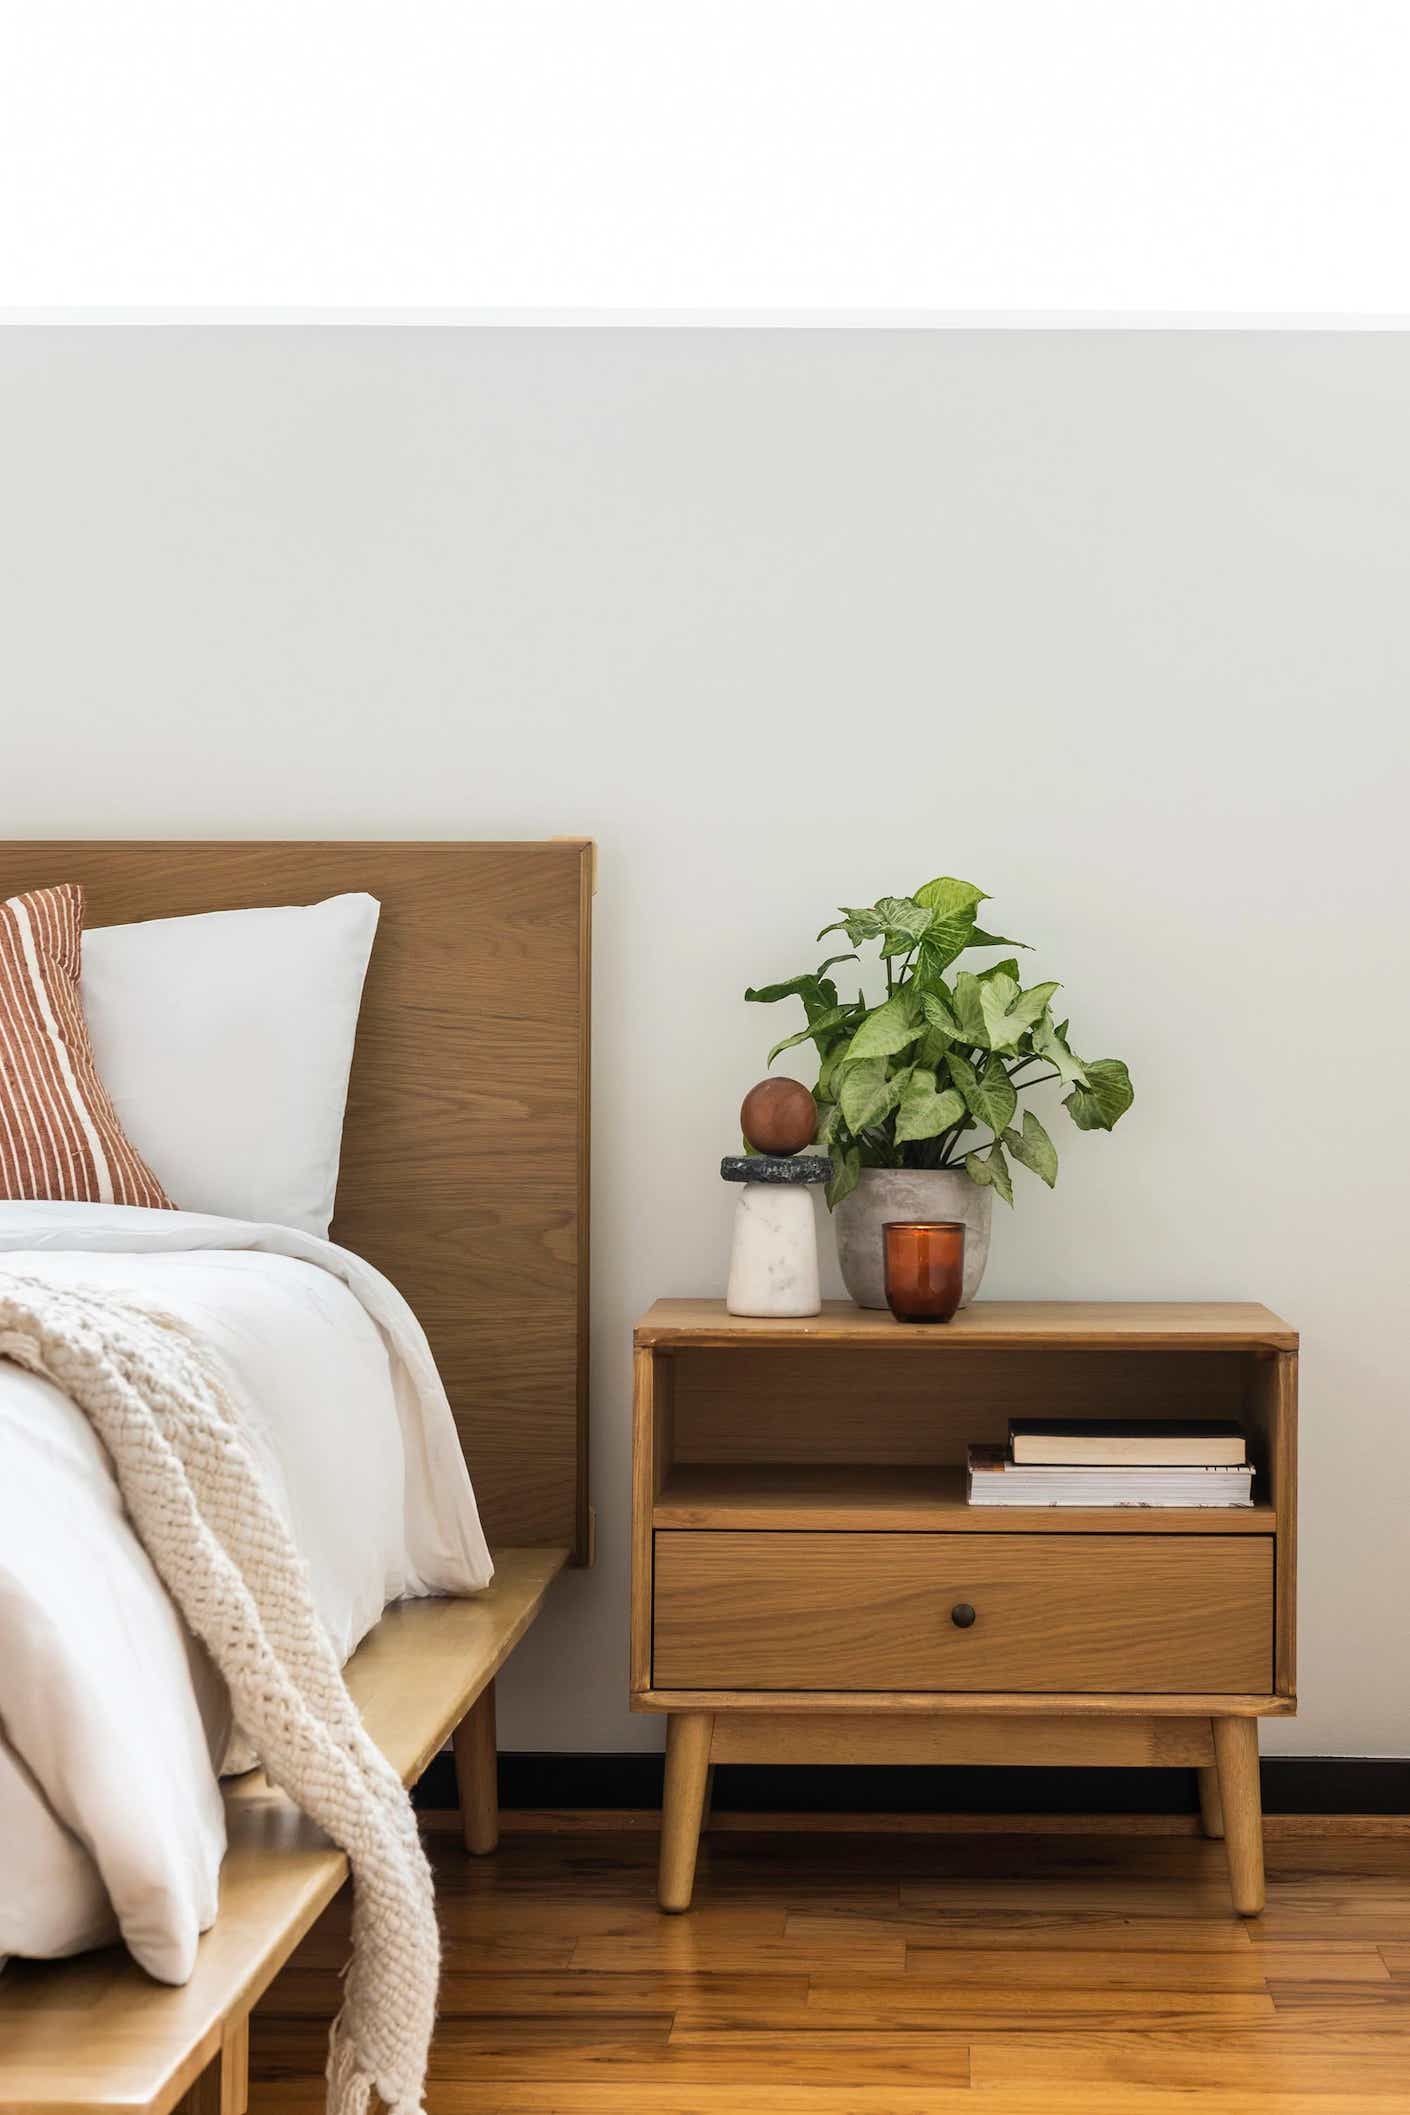 A sleek and minimalistic nightstand is pictured next to a clean white bed.